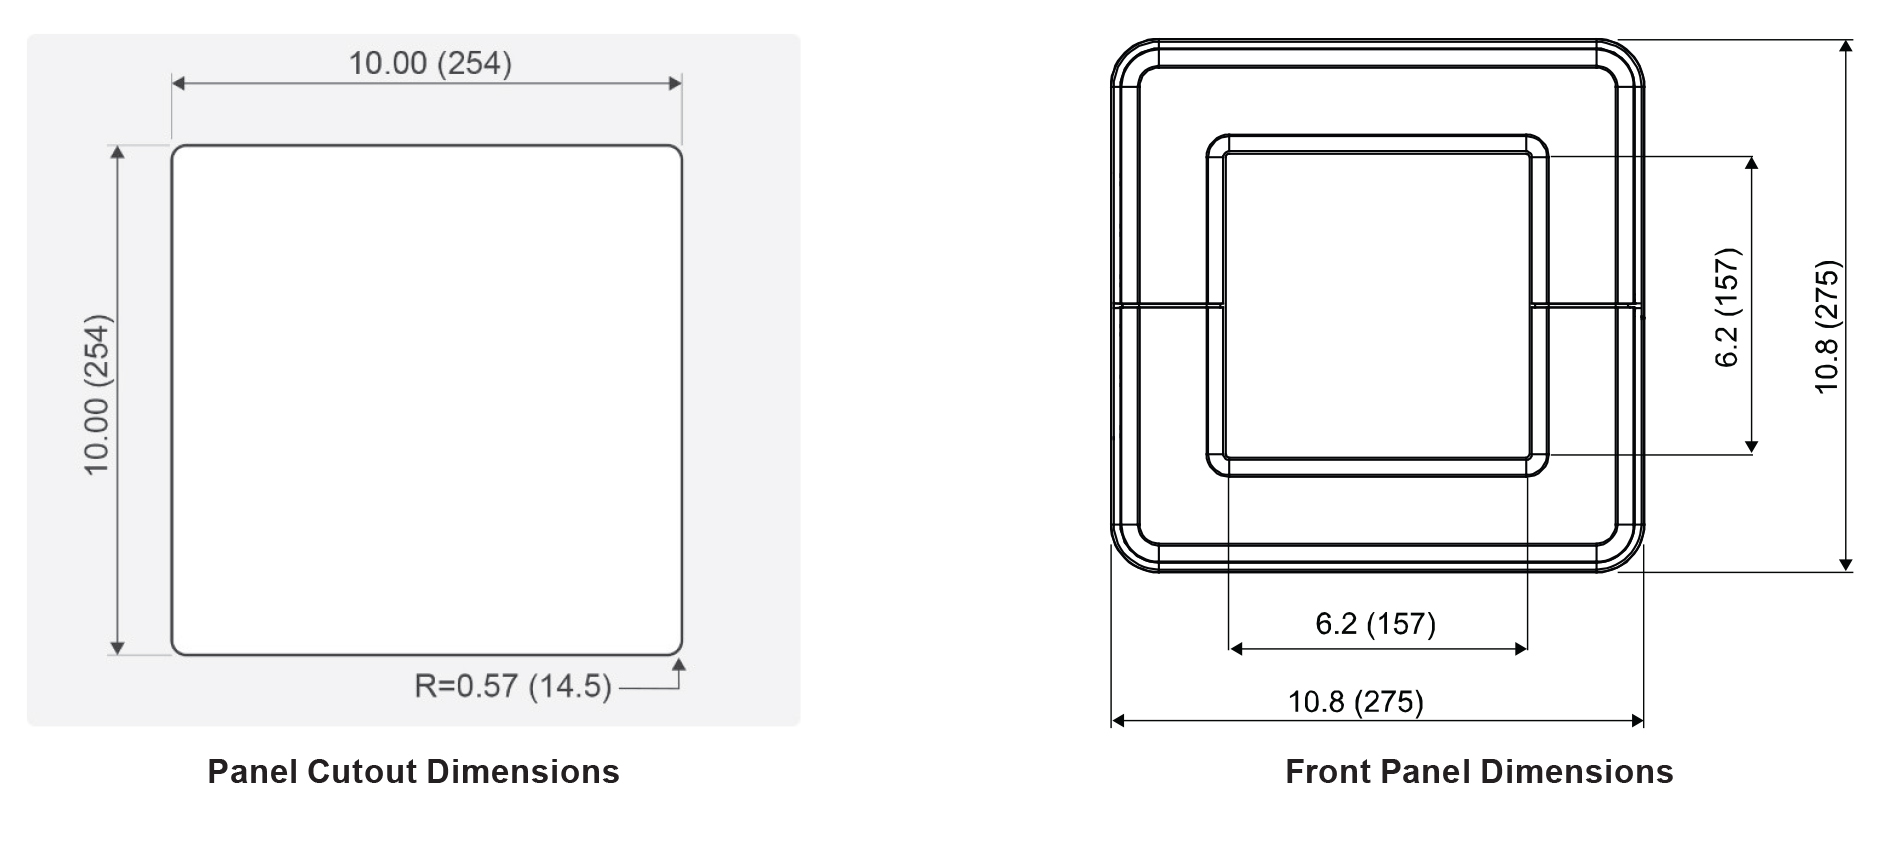 PD9000 Panel Cutout Dimensions and Front Panel Dimensions